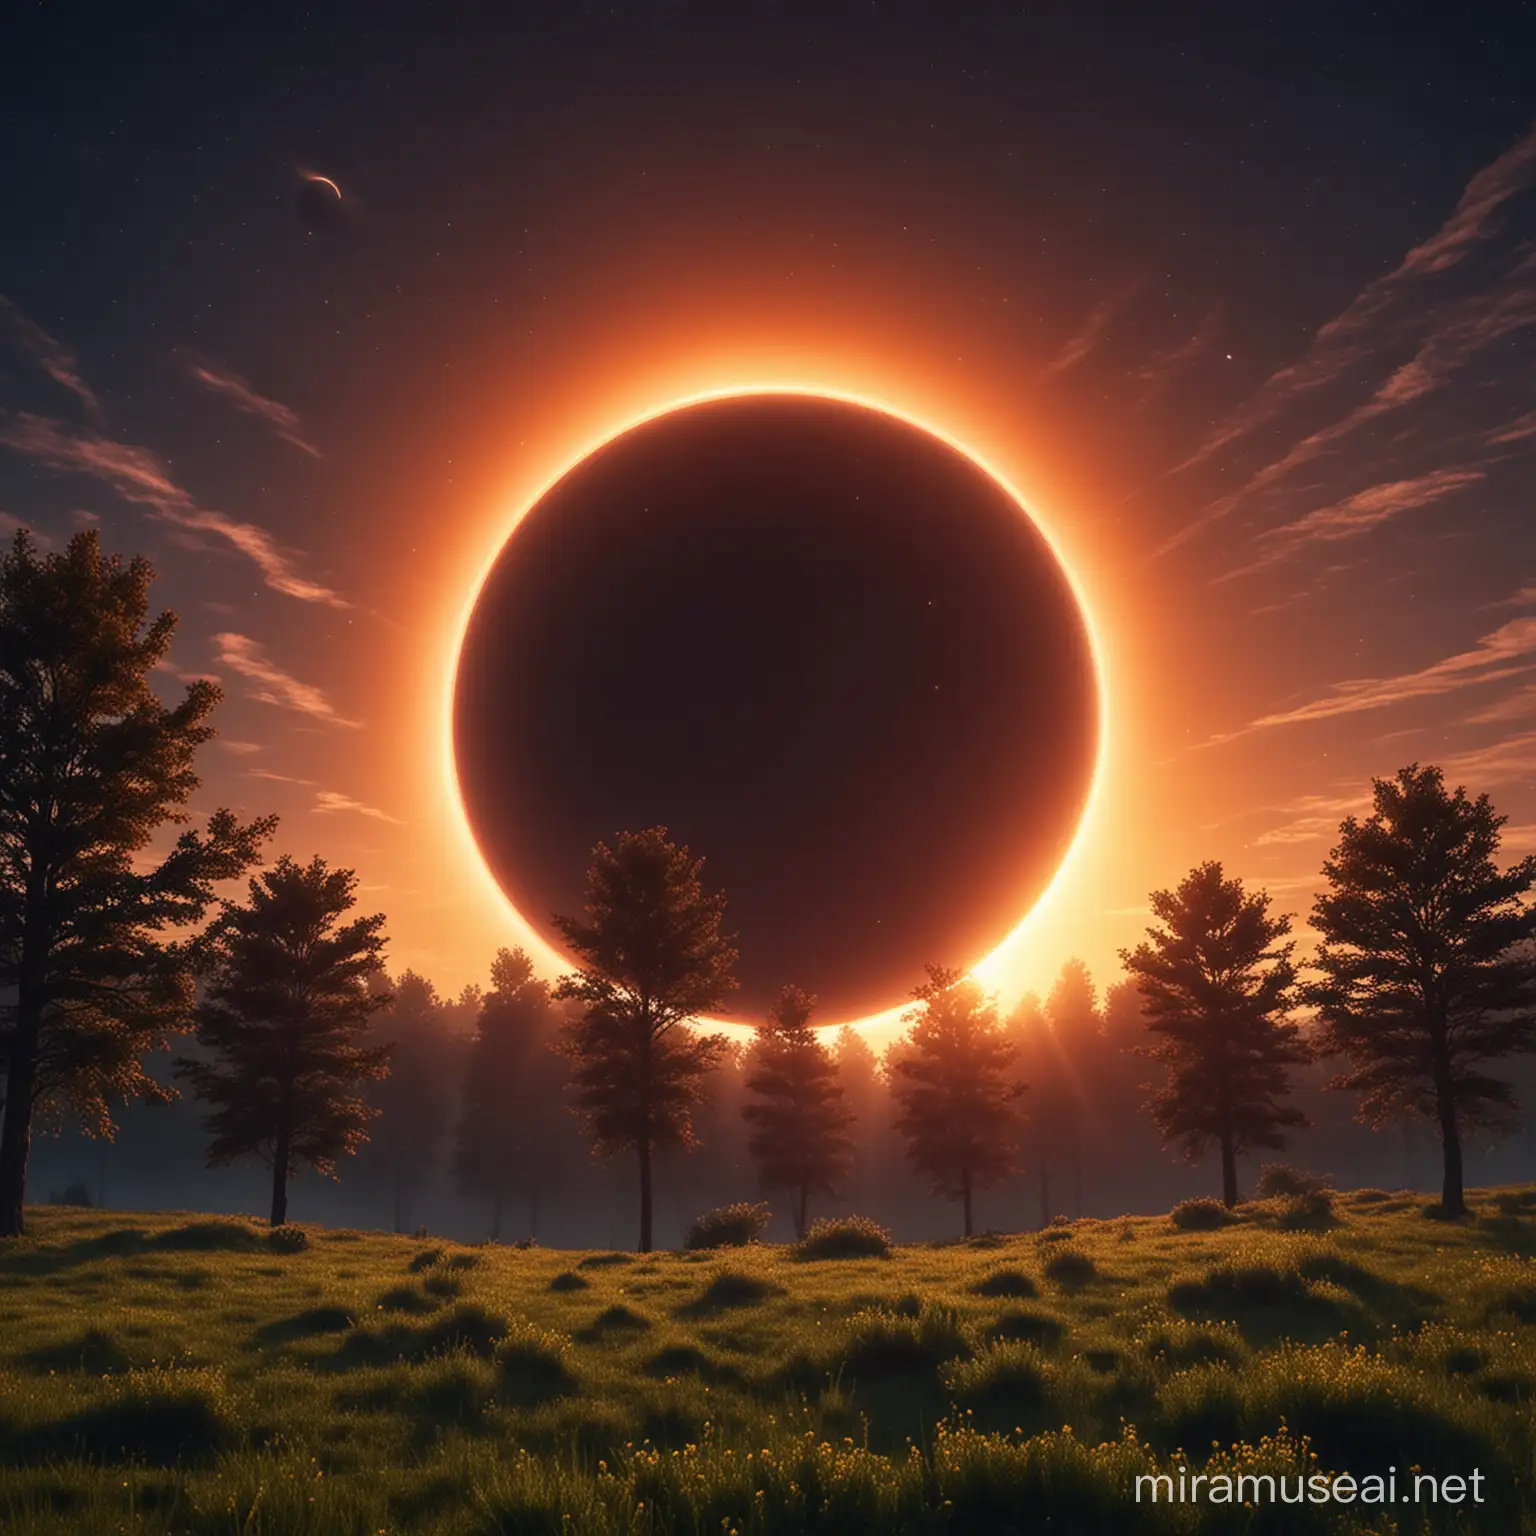 beauttiful nature scene with solar eclipse 